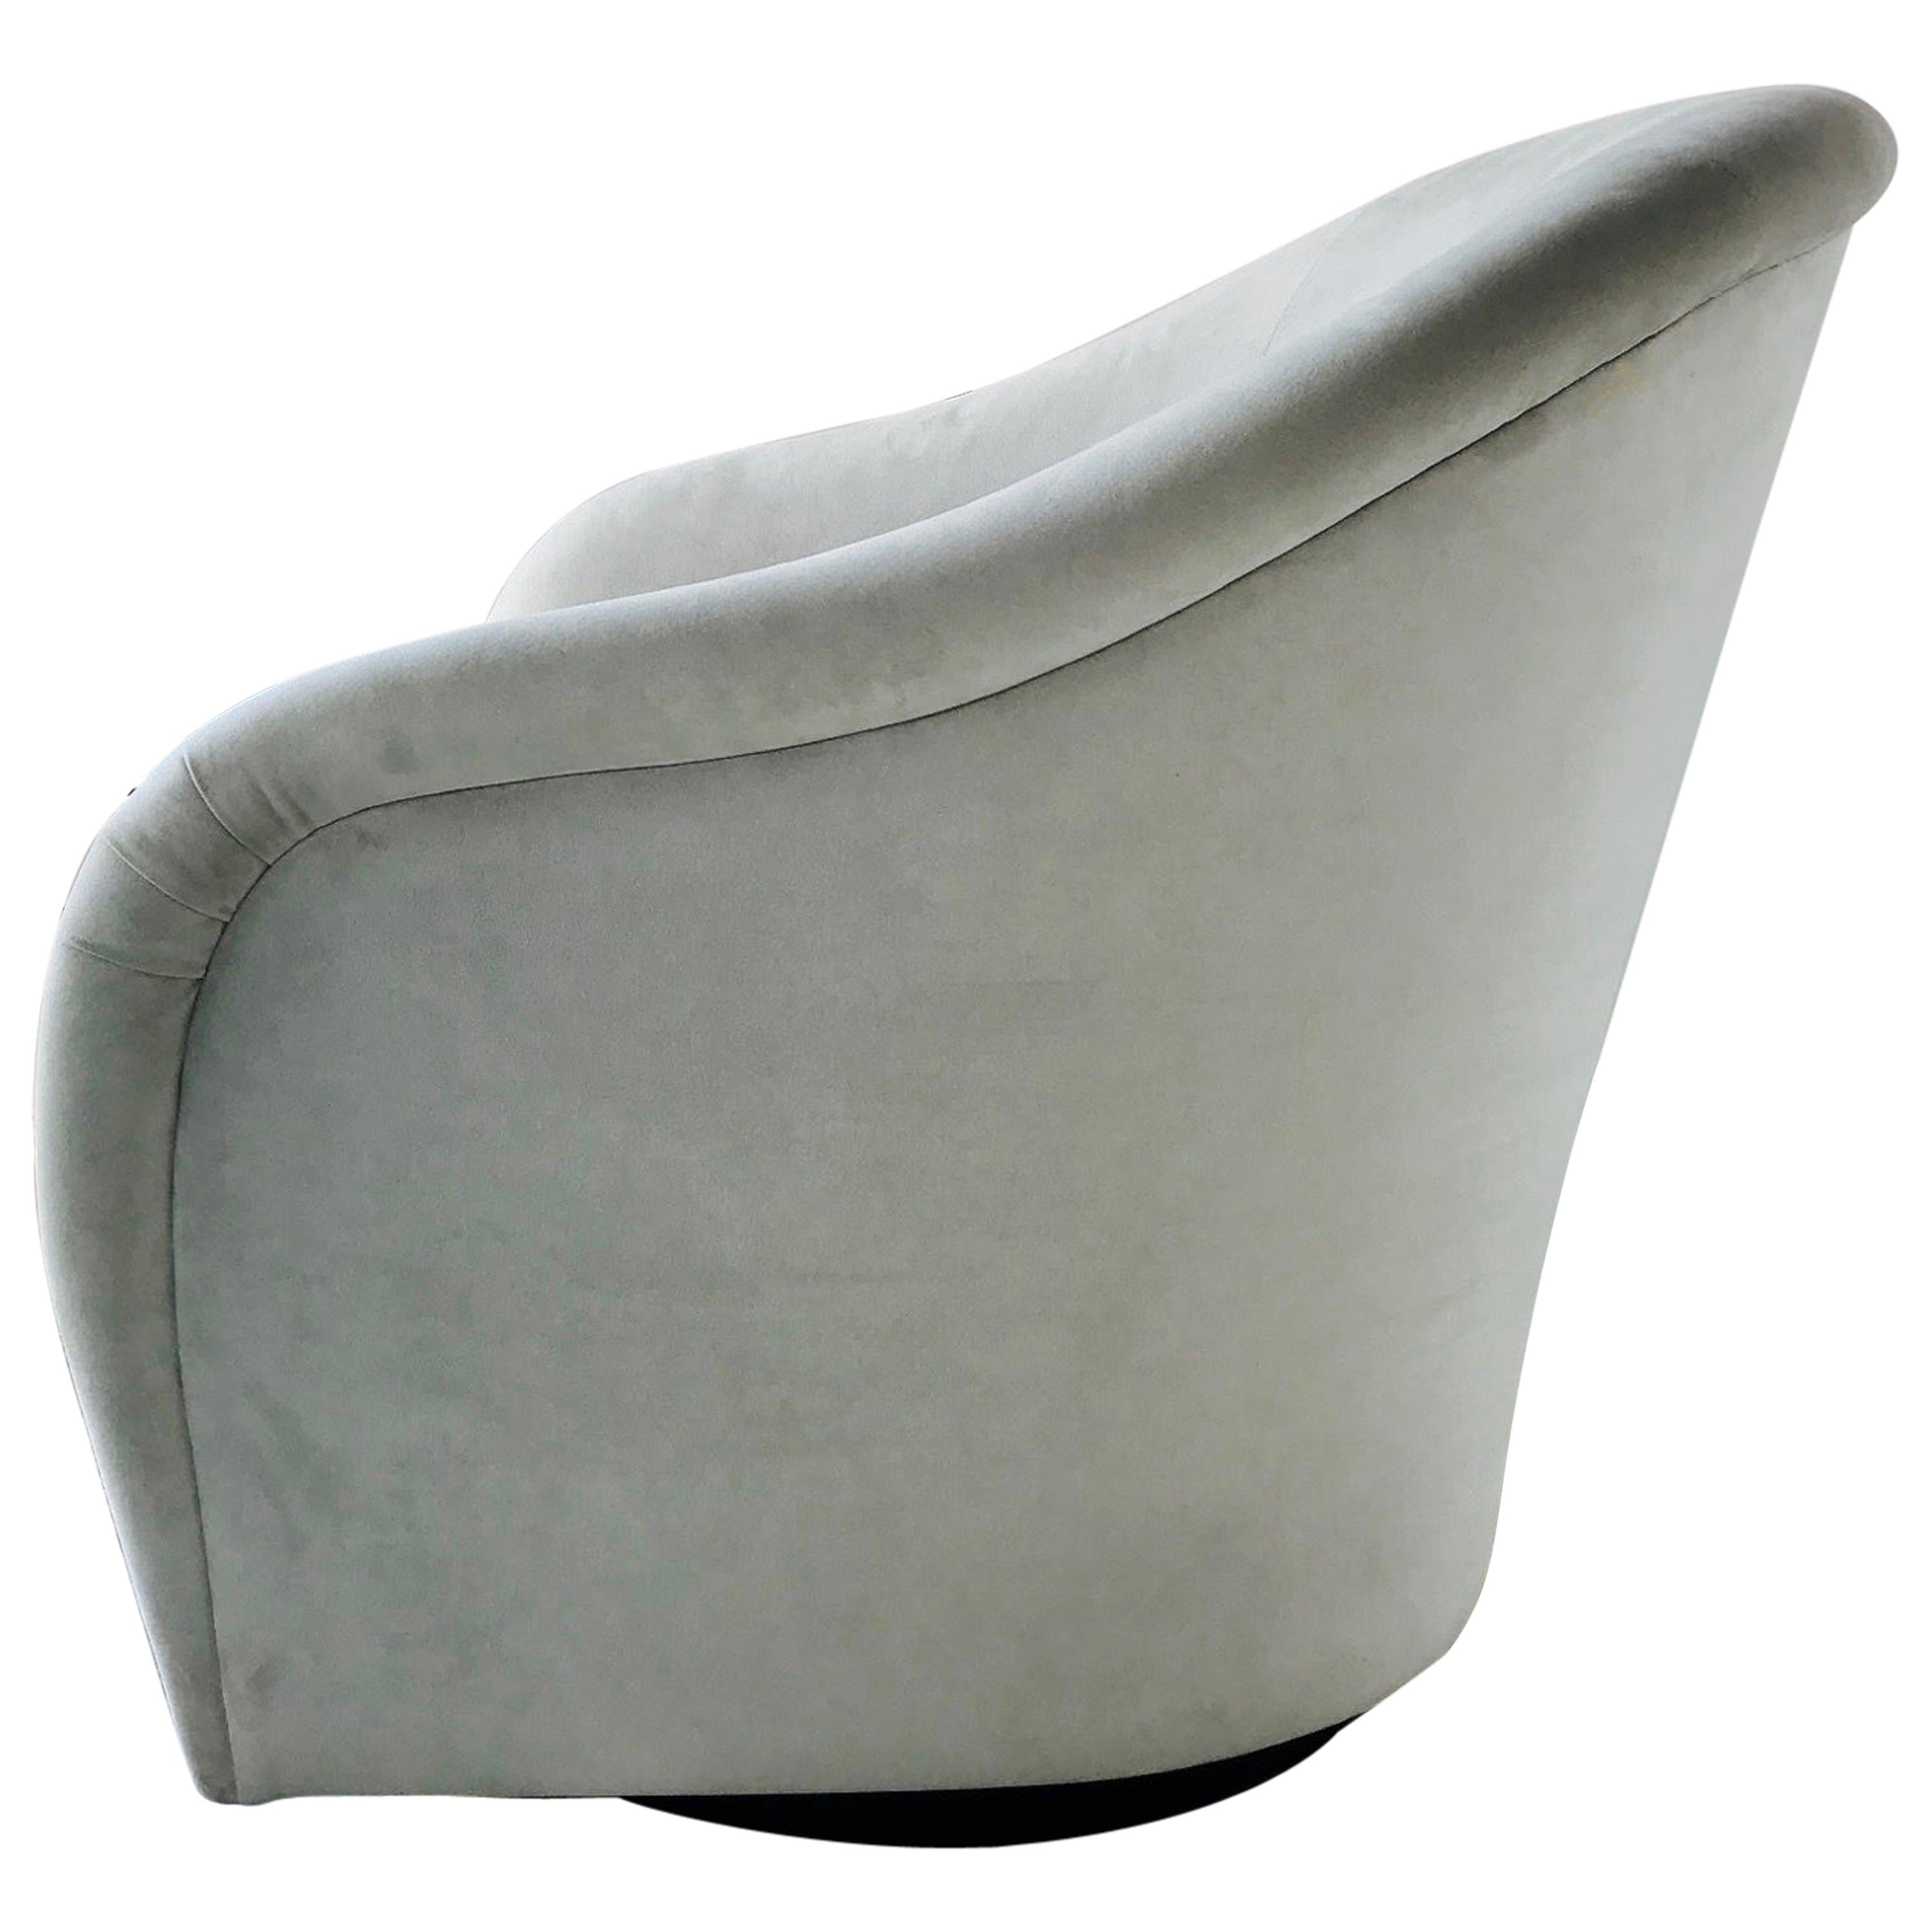 Gorgeous Mid-Century Modern lounge chair with swivel base design. Chair has barrel back form with elegant curved and tapered sides. Newly upholstered in light fine grey velvet with reversible zippered seat cushion and original Interior Crafts label.